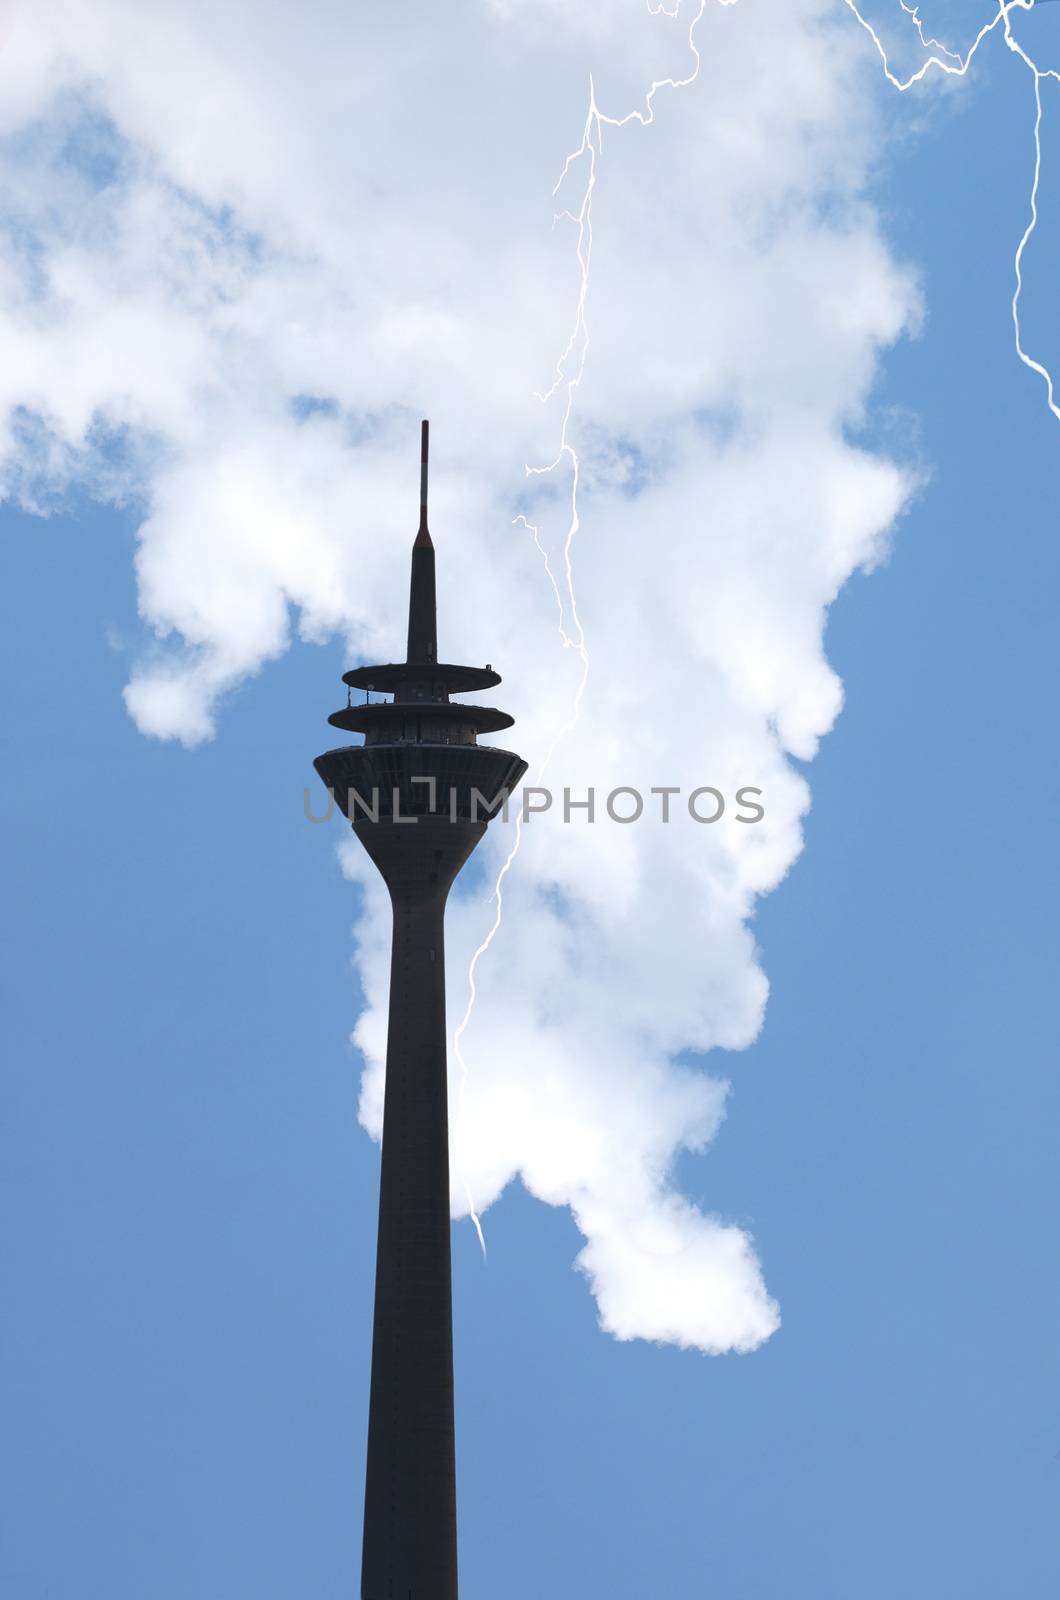 Dusseldorf TV tower against dramatic sky by JFsPic